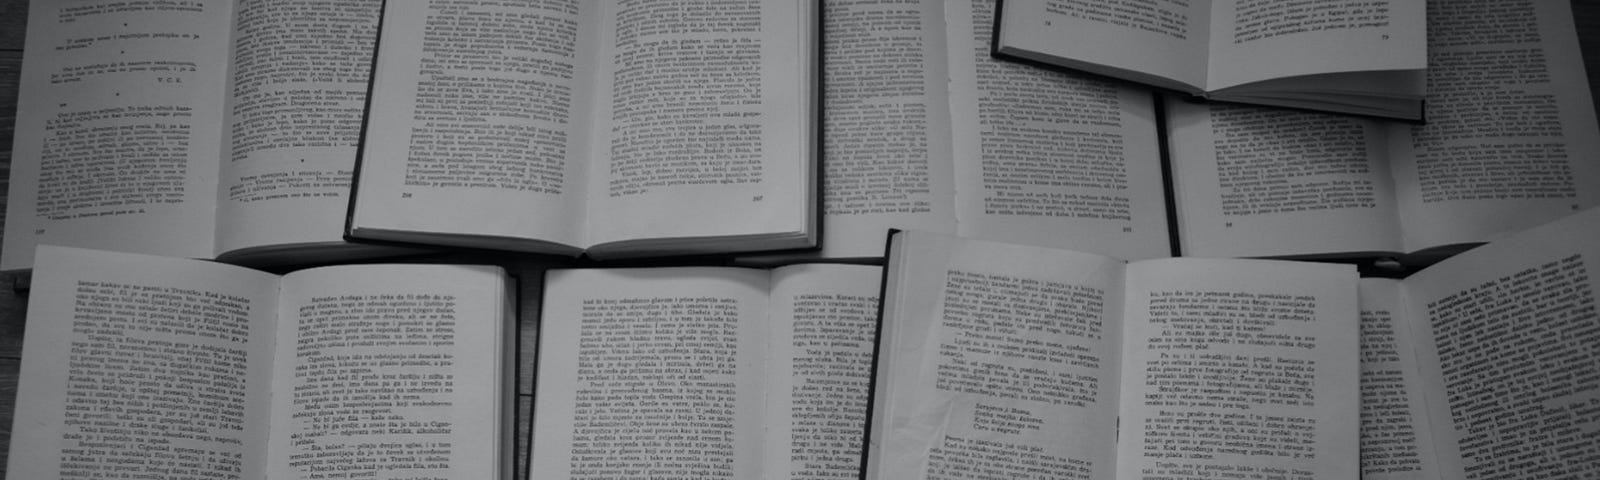 A large image of open textbooks in black and white.